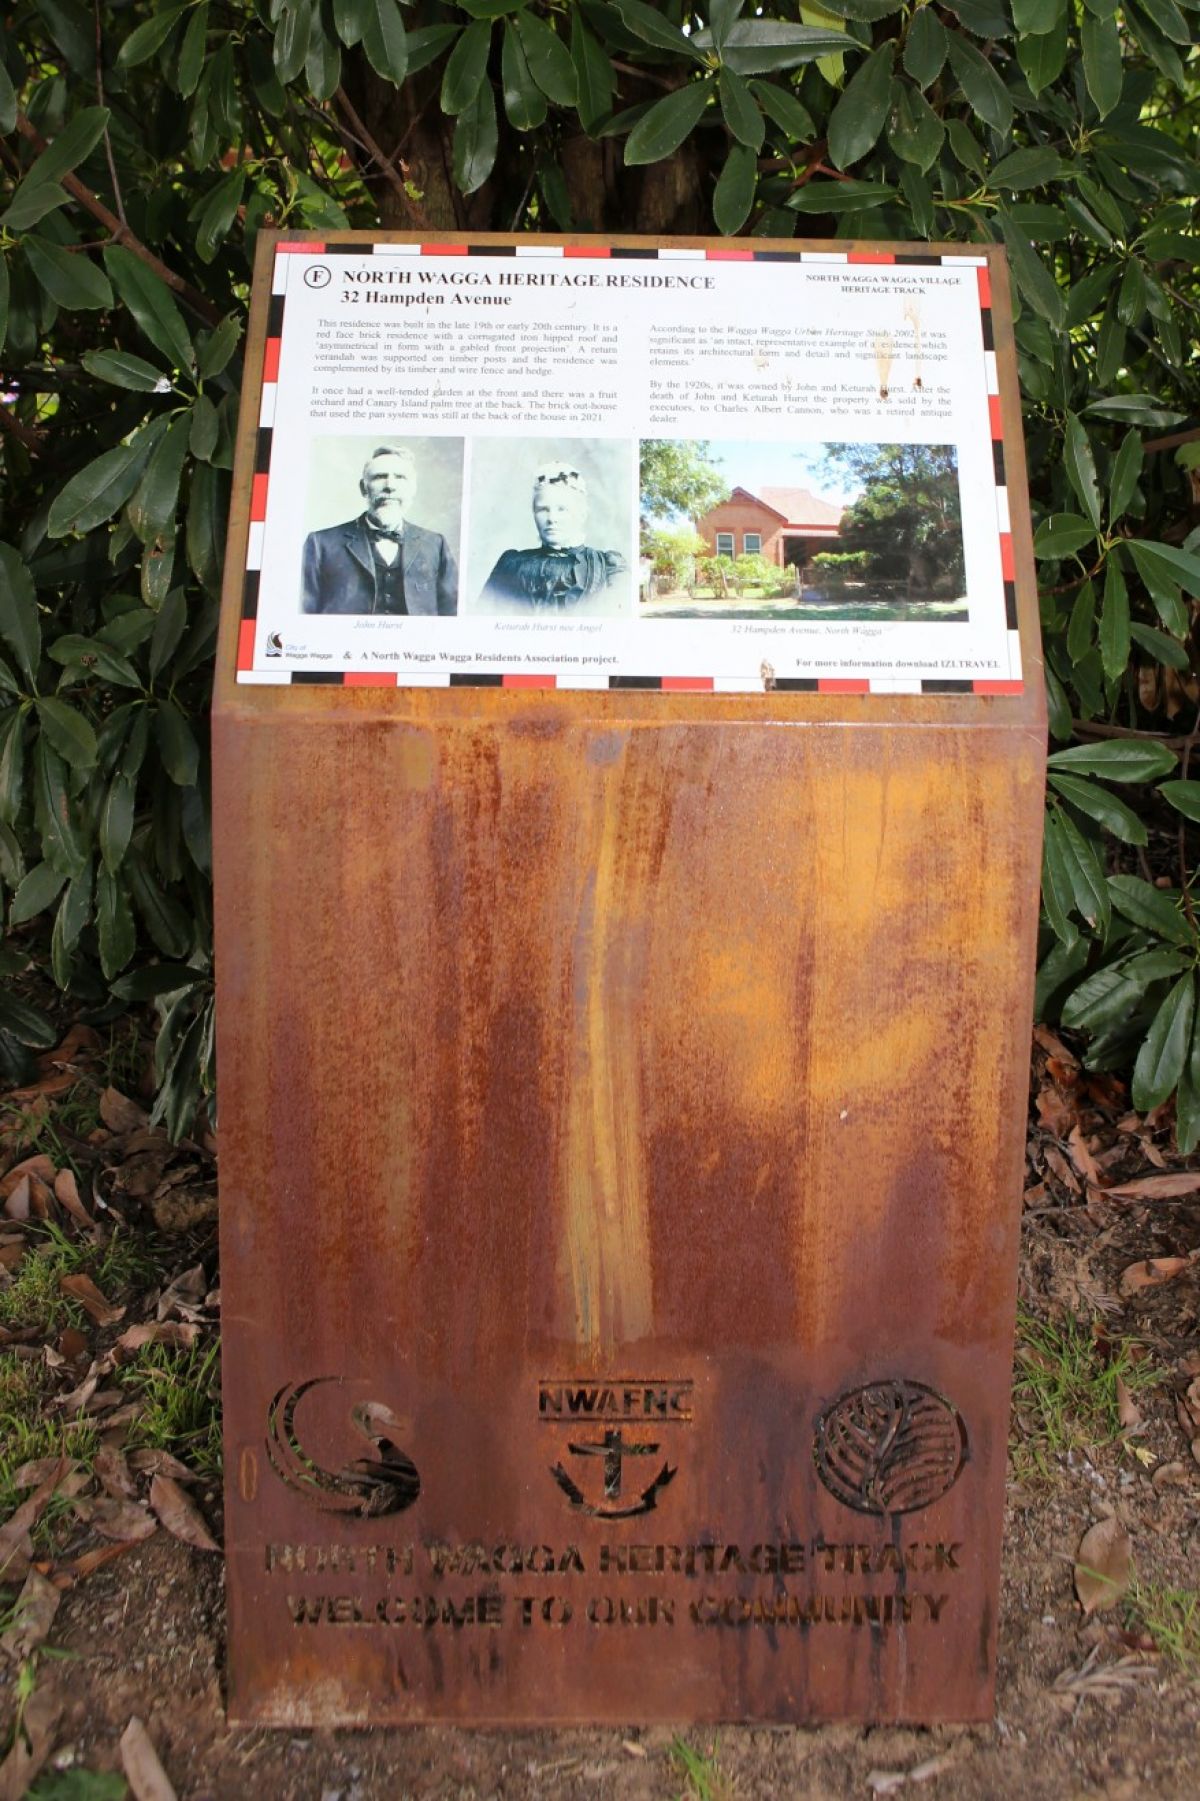 metal sign with images and text detailing history of a North Wagga residence